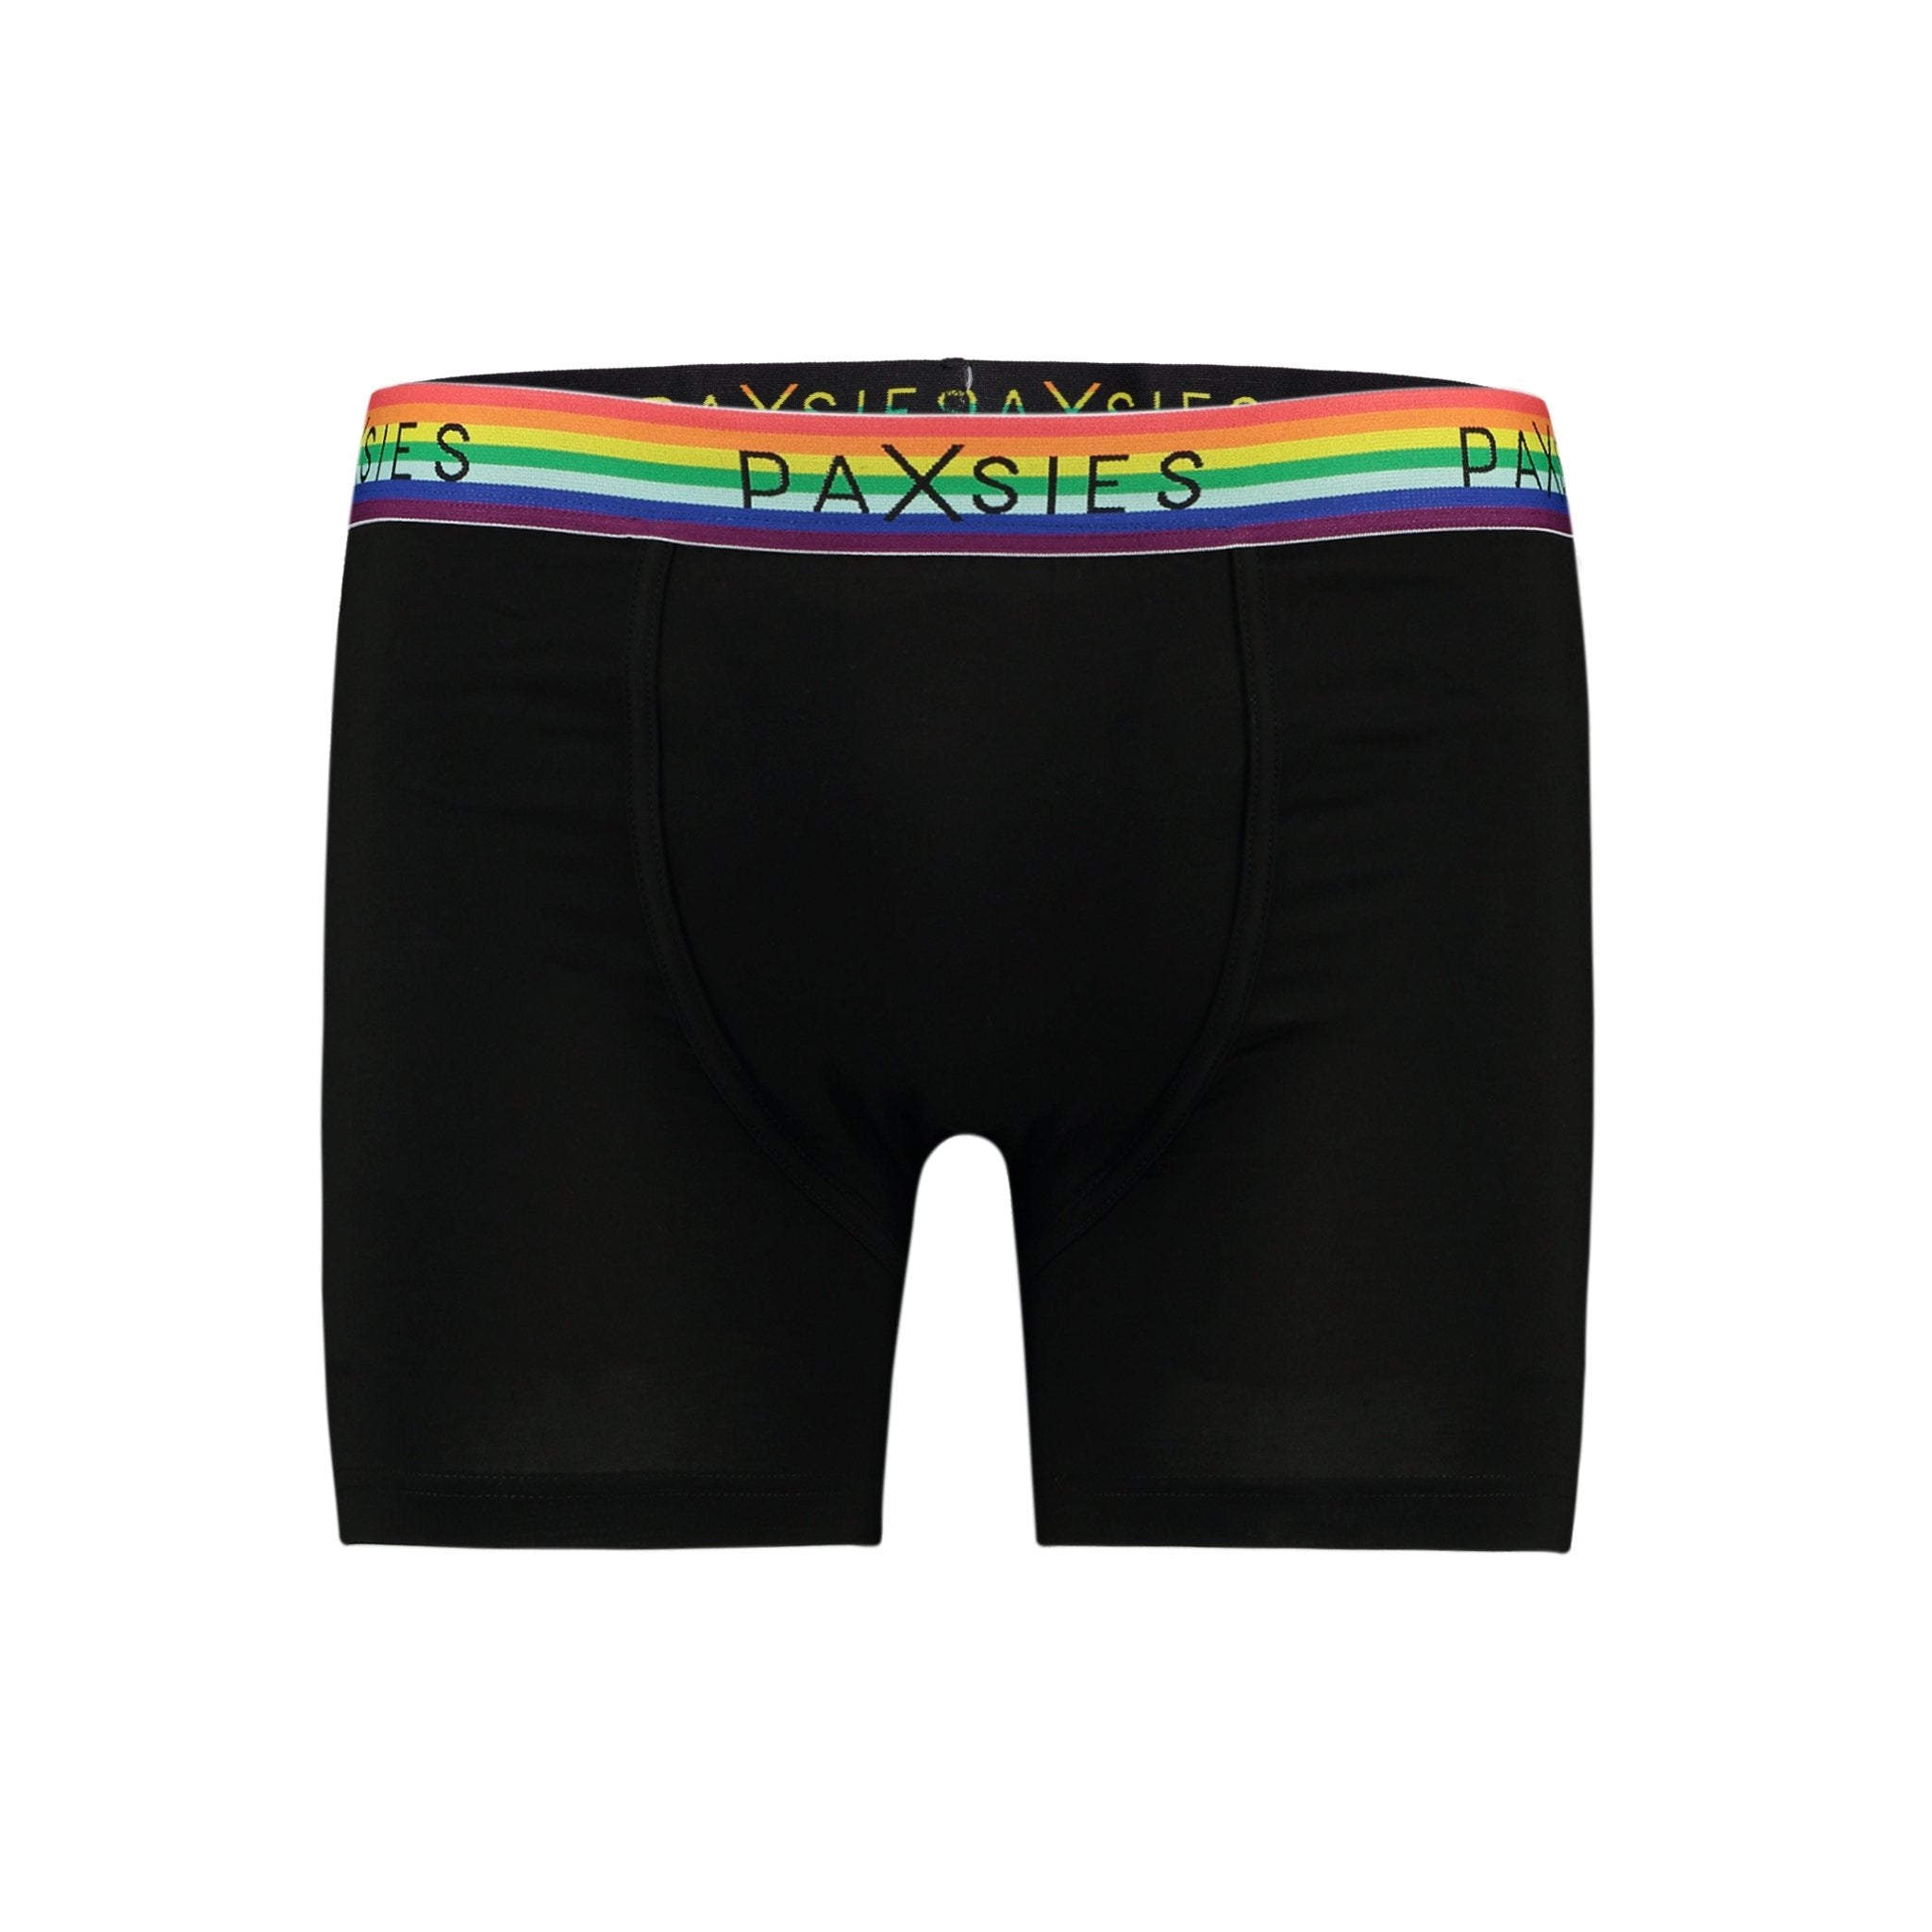 Pride Black All-in-One Packing Boxers